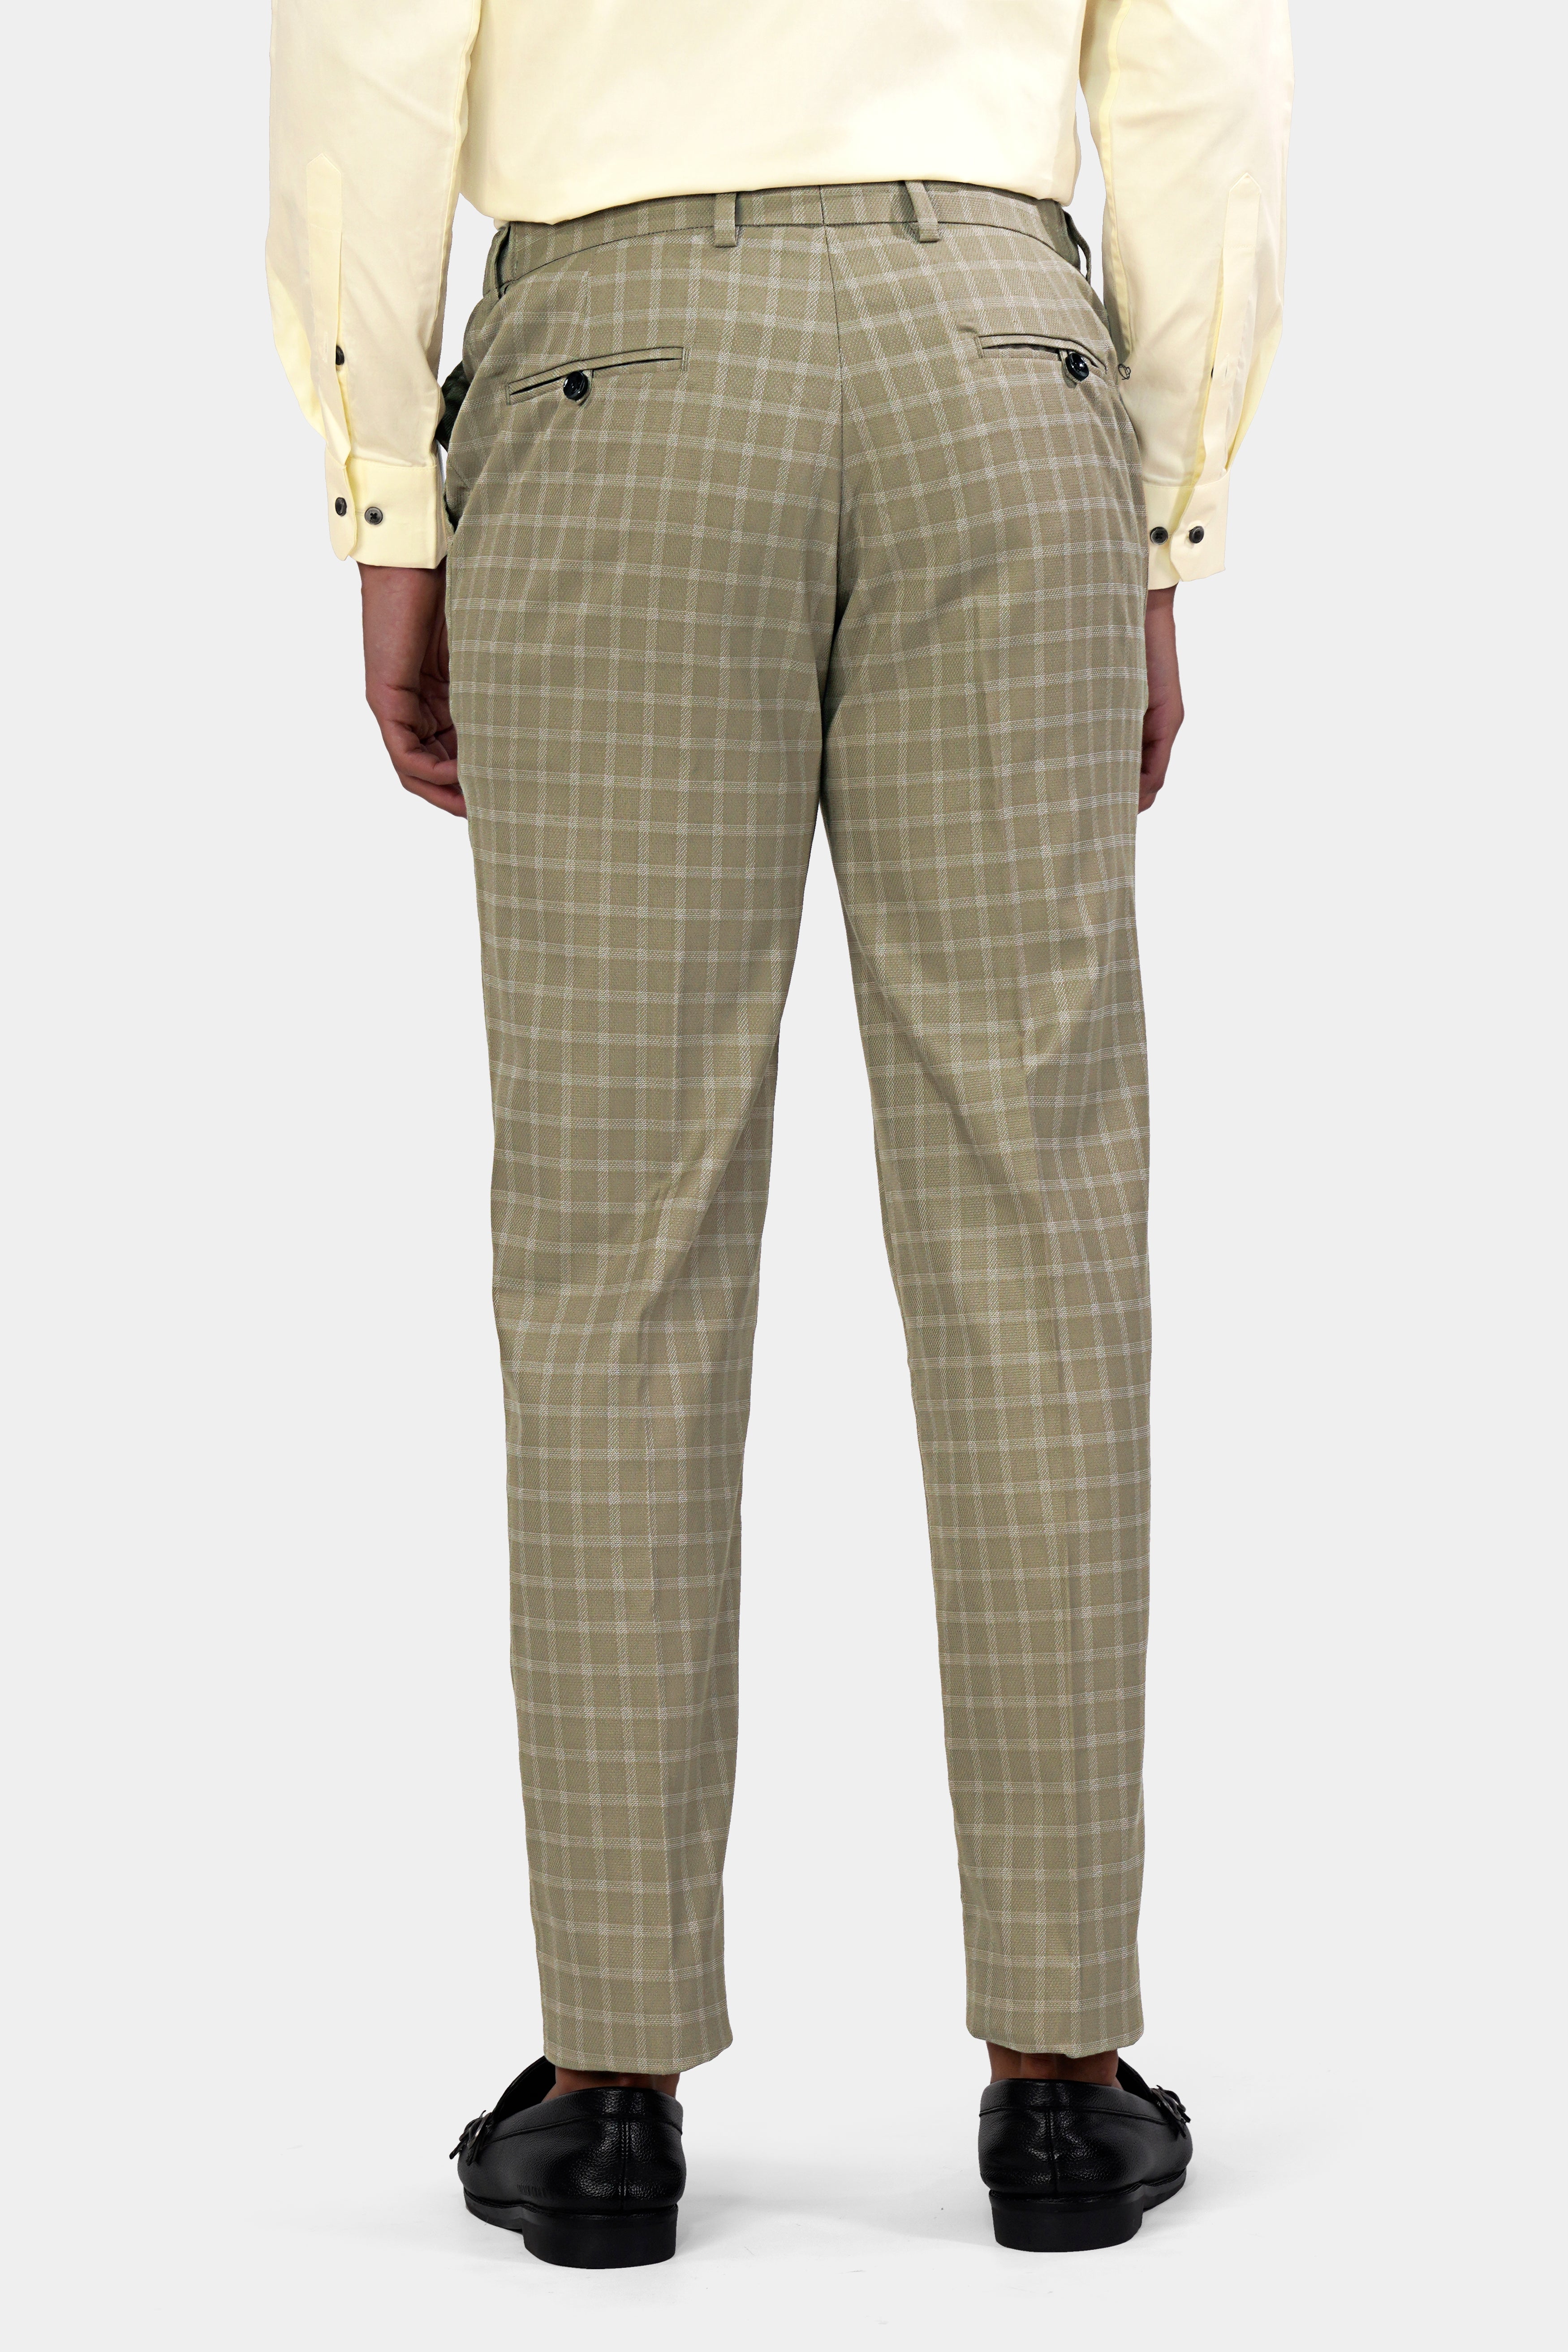 Sandrift Brown Checkered Wool Rich Stretchable Pant T2931-SW-28, T2931-SW-30, T2931-SW-32, T2931-SW-34, T2931-SW-36, T2931-SW-38, T2931-SW-40, T2931-SW-42, T2931-SW-44